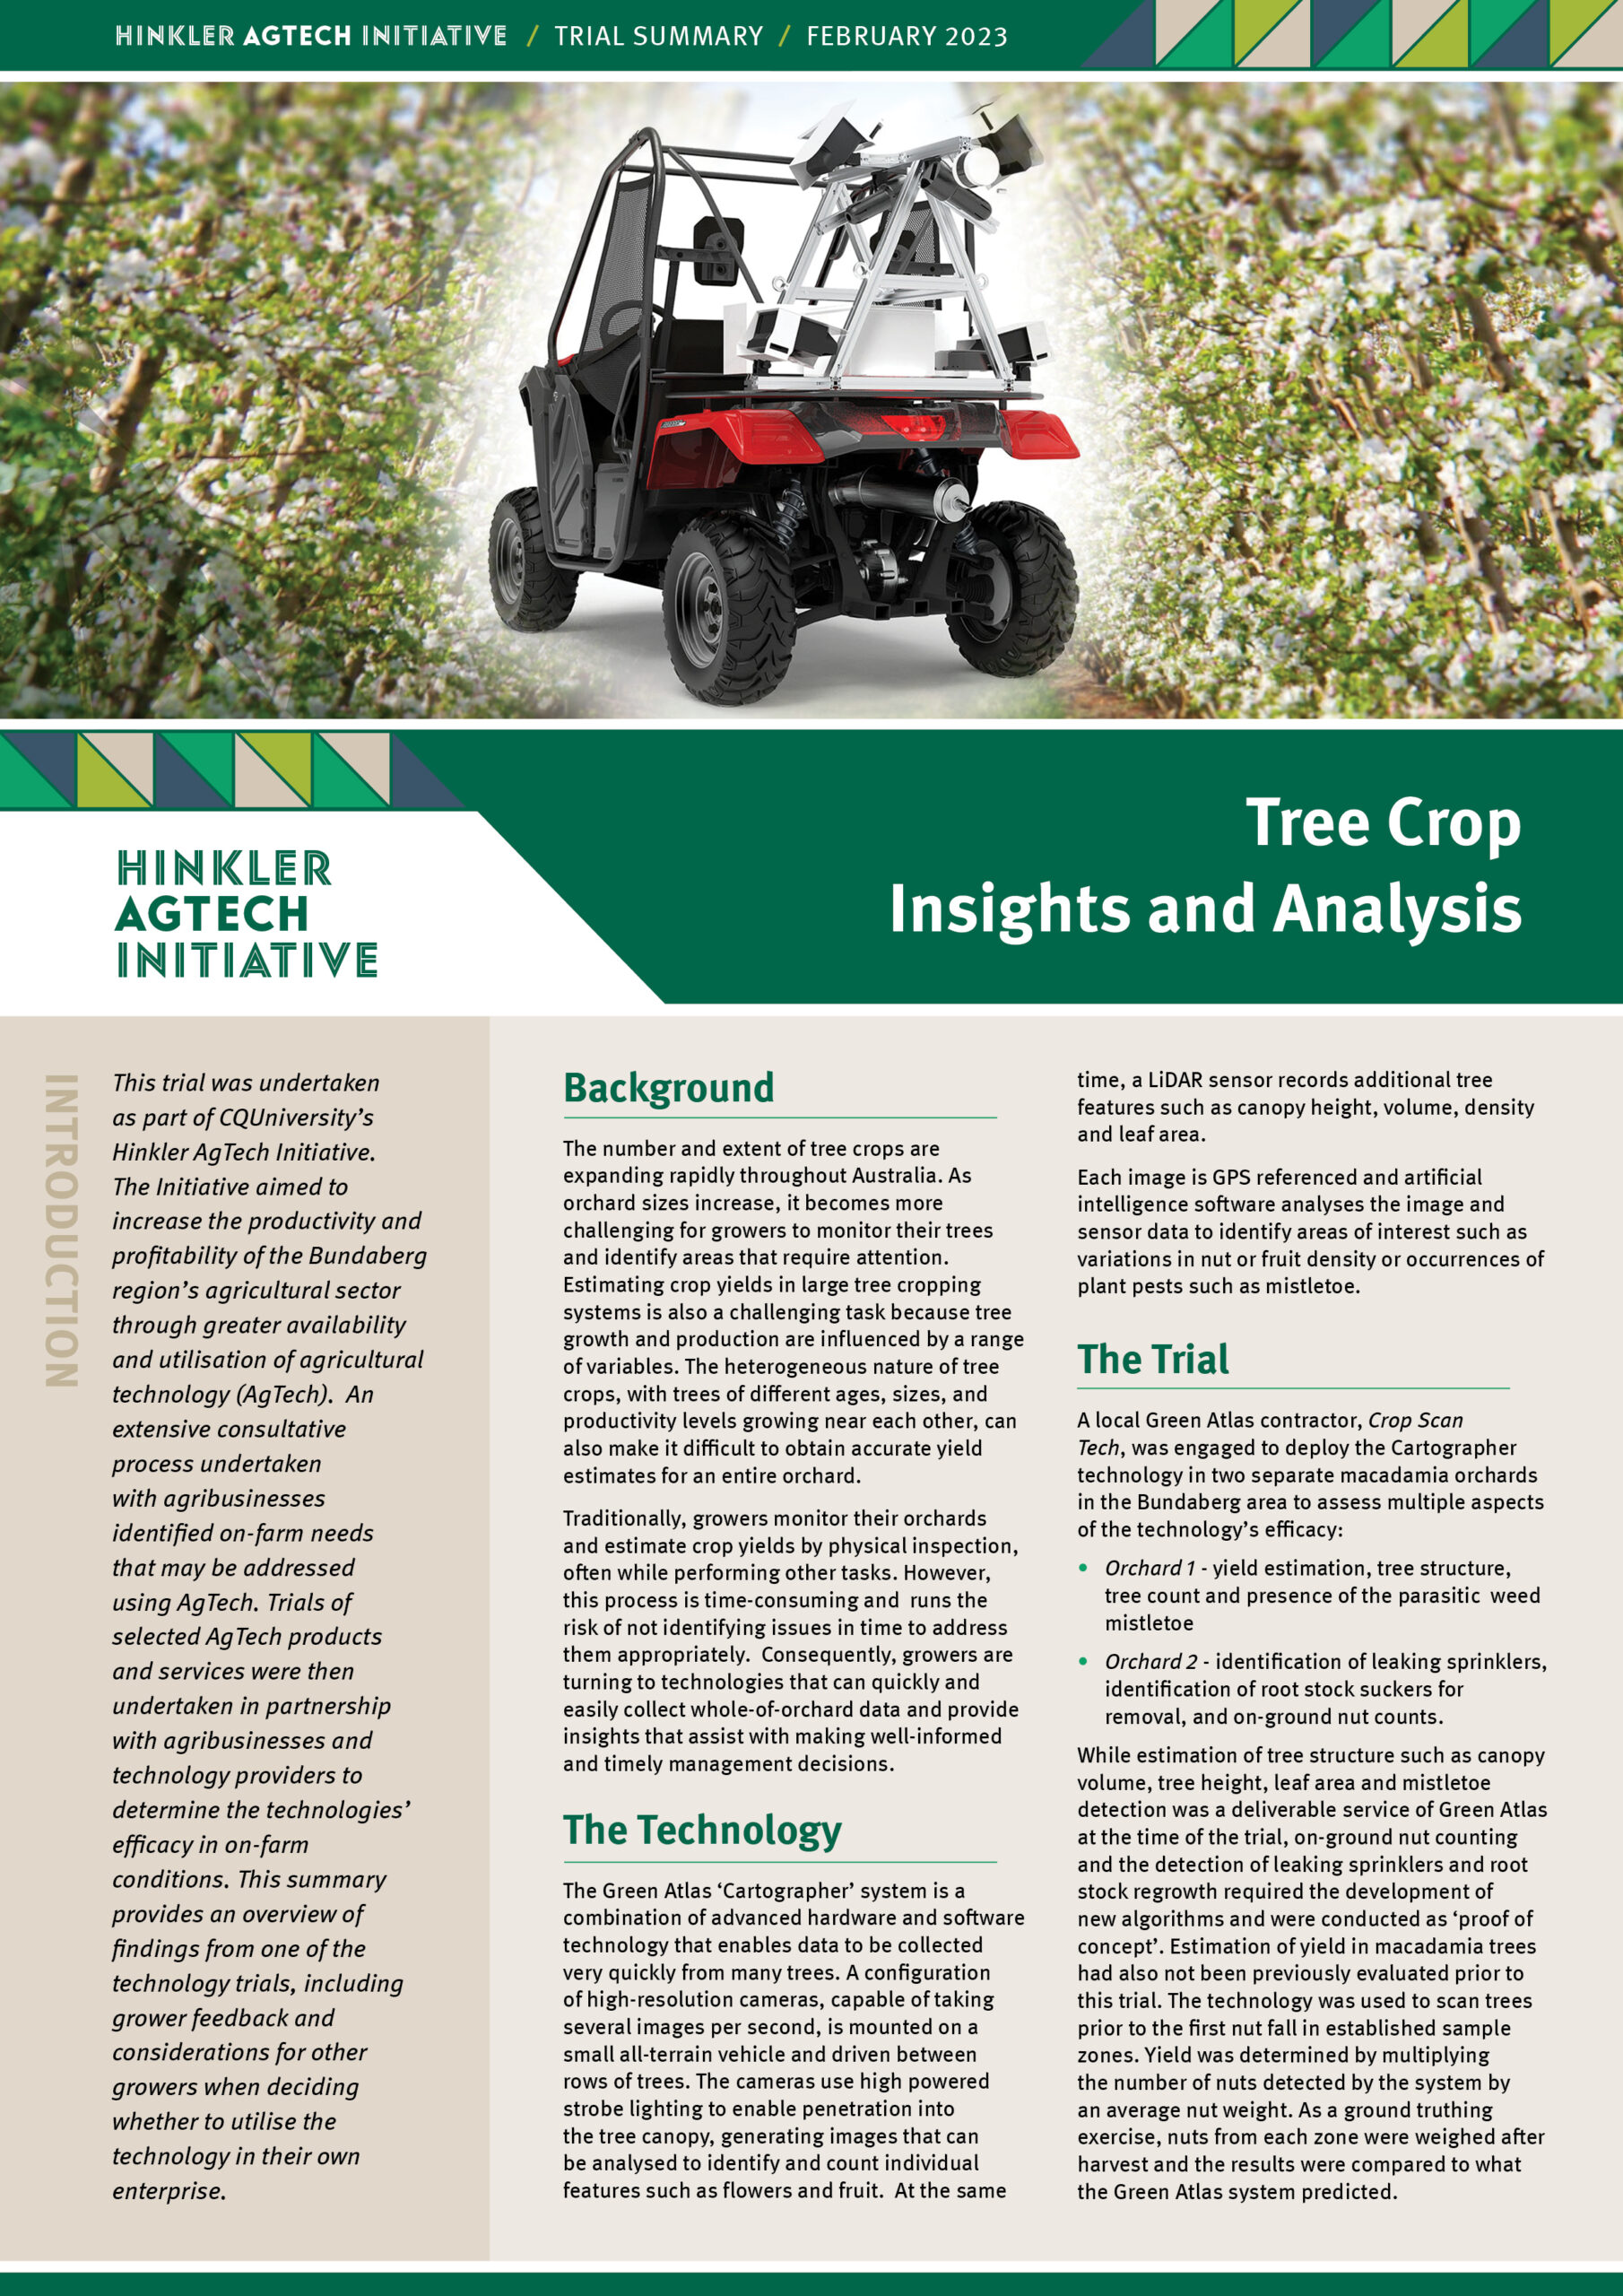 Tree Crop Insights and Analysis